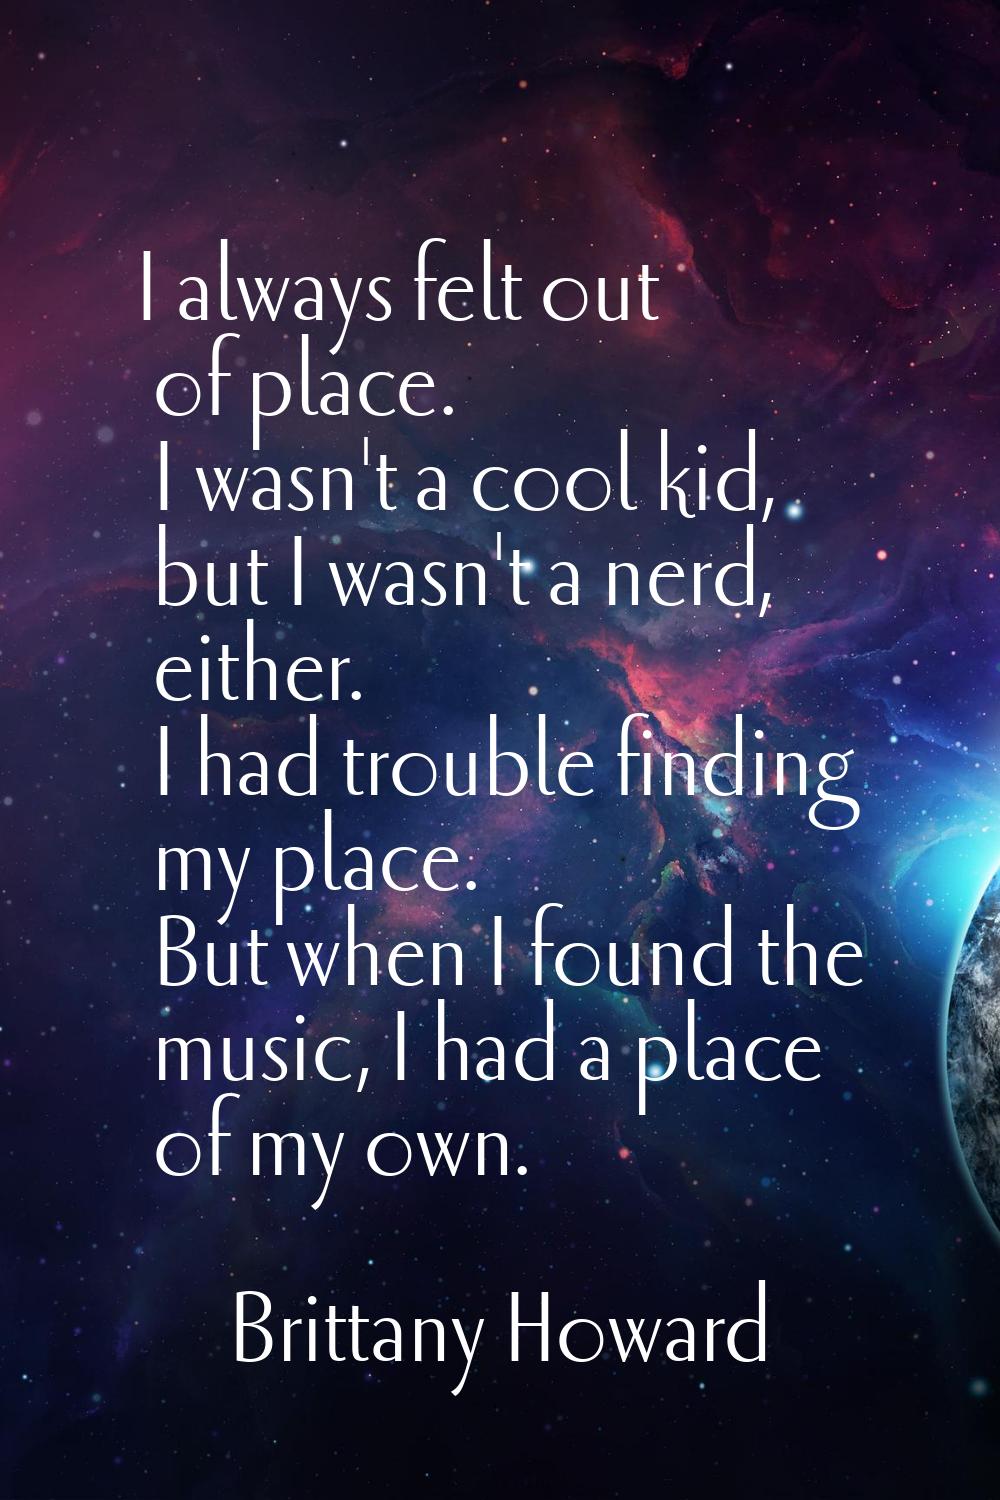 I always felt out of place. I wasn't a cool kid, but I wasn't a nerd, either. I had trouble finding